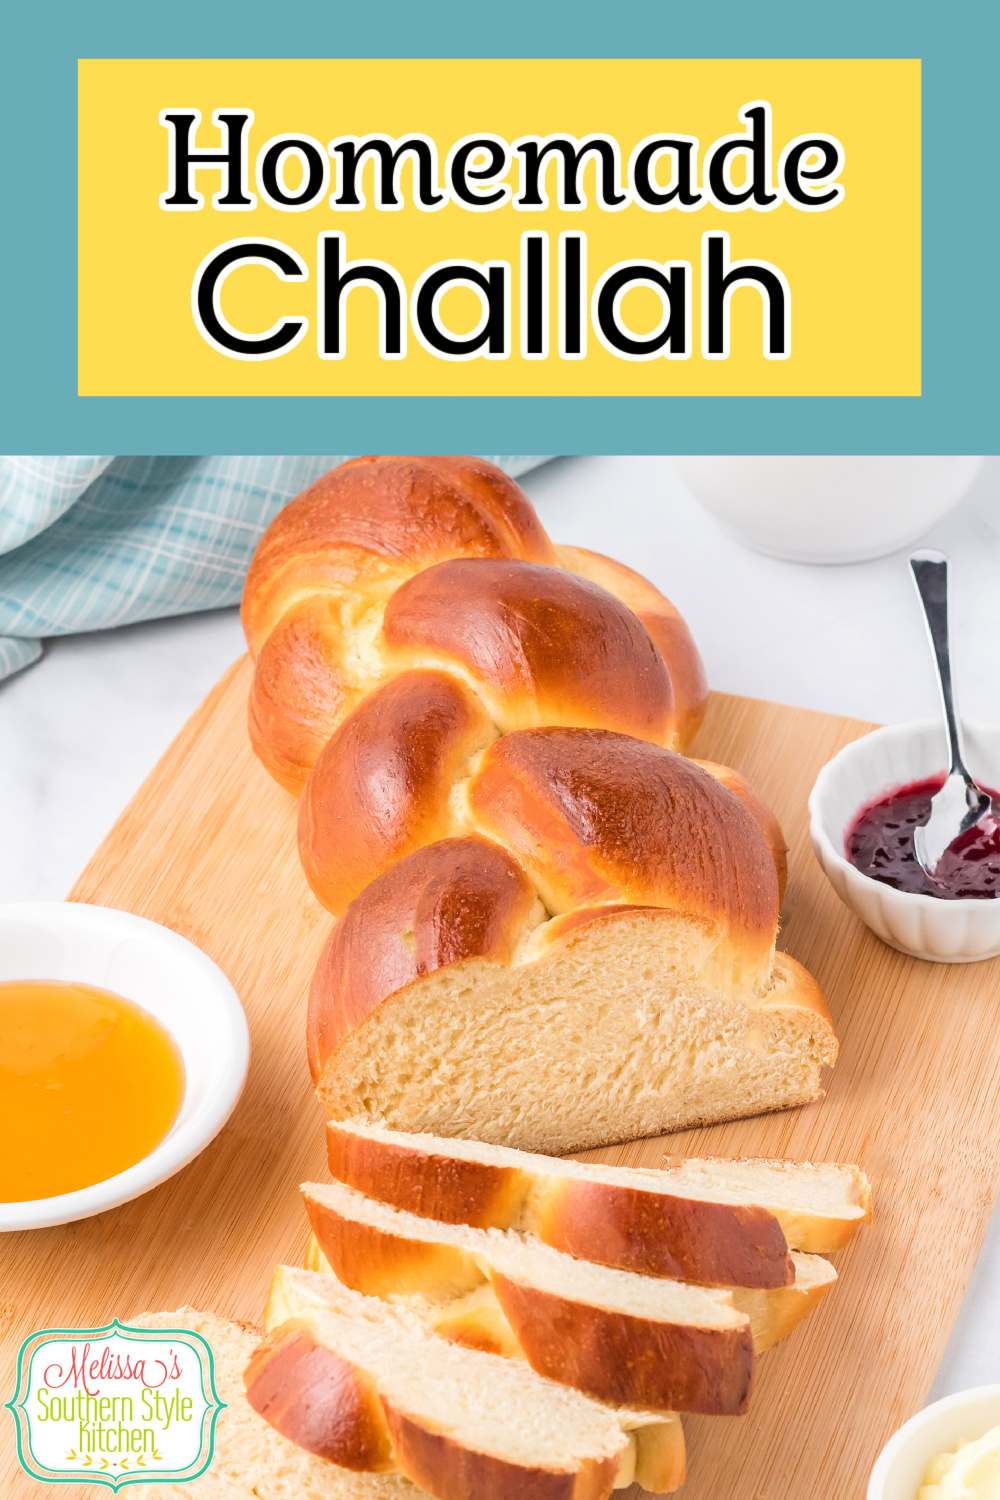 This delectable Challah Bread is perfection served as a side dish or with soups and stews for dipping in the broth. #challah #challahbread #homemadechallahbread #breadrecipes #easybreadrecipes #hannukahrecipes #bread via @melissasssk